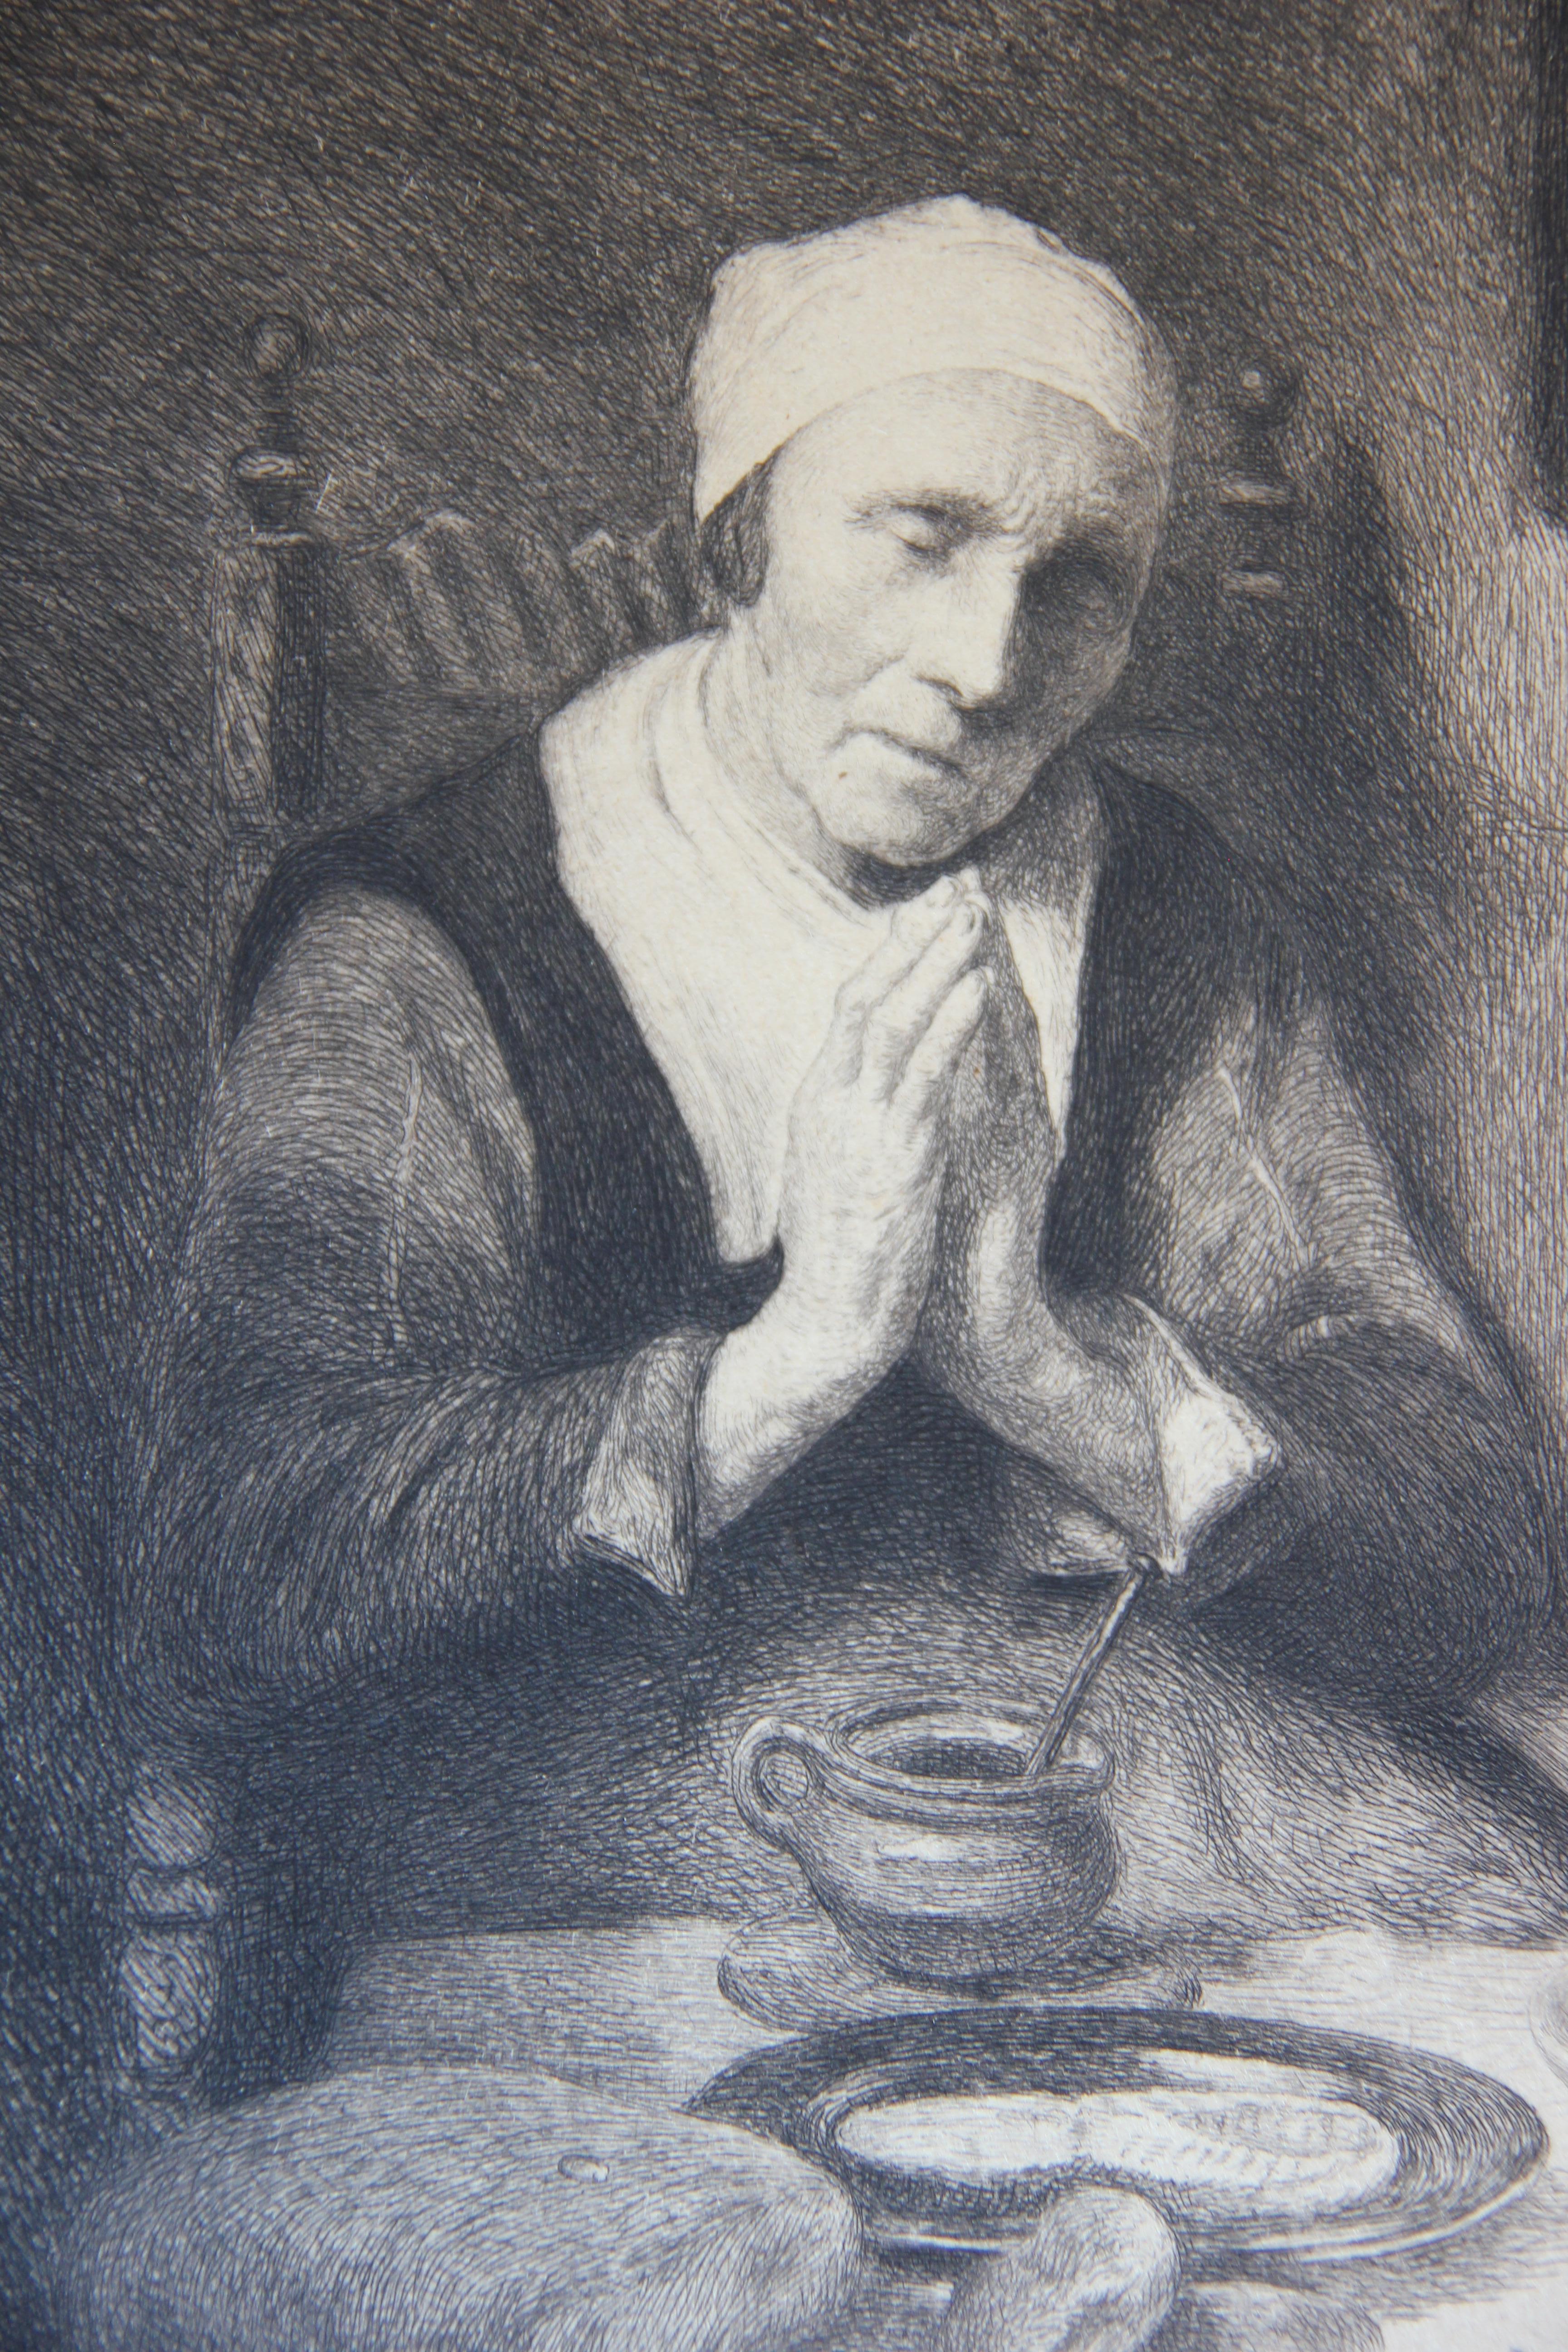 Portrait of an Elderly Woman Praying at a Table Etching - Print by William Harry Warren Bicknell